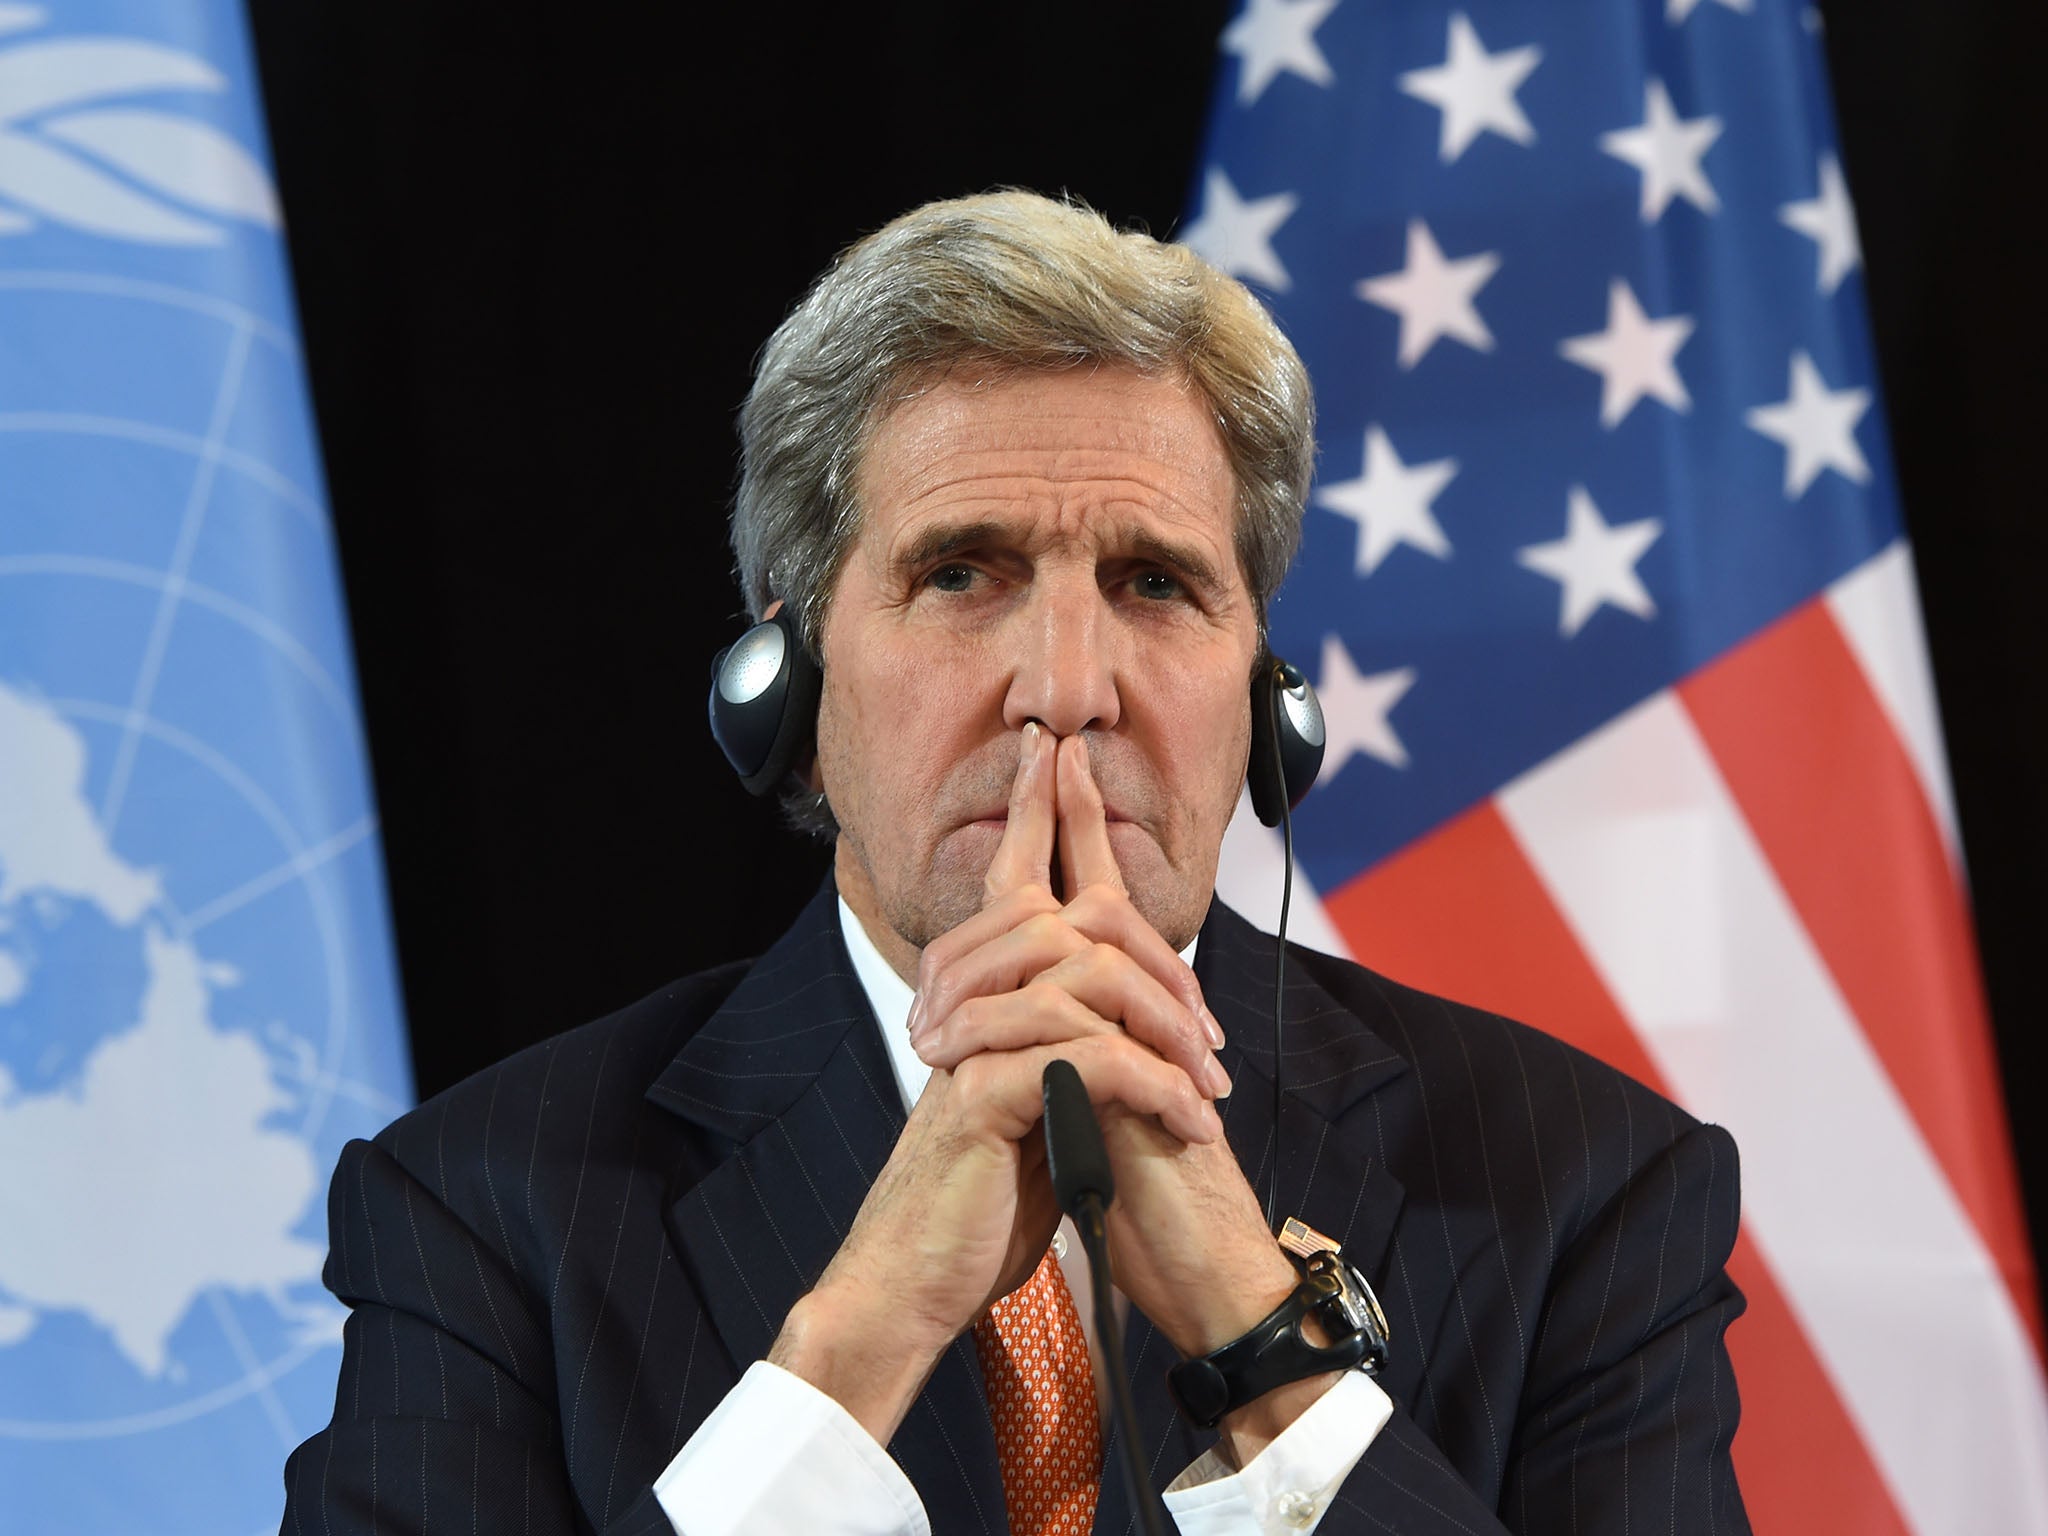 US Secretary of States John Kerry follows a news conference after the International Syria Support Group (ISSG) meeting in Munich, southern Germany